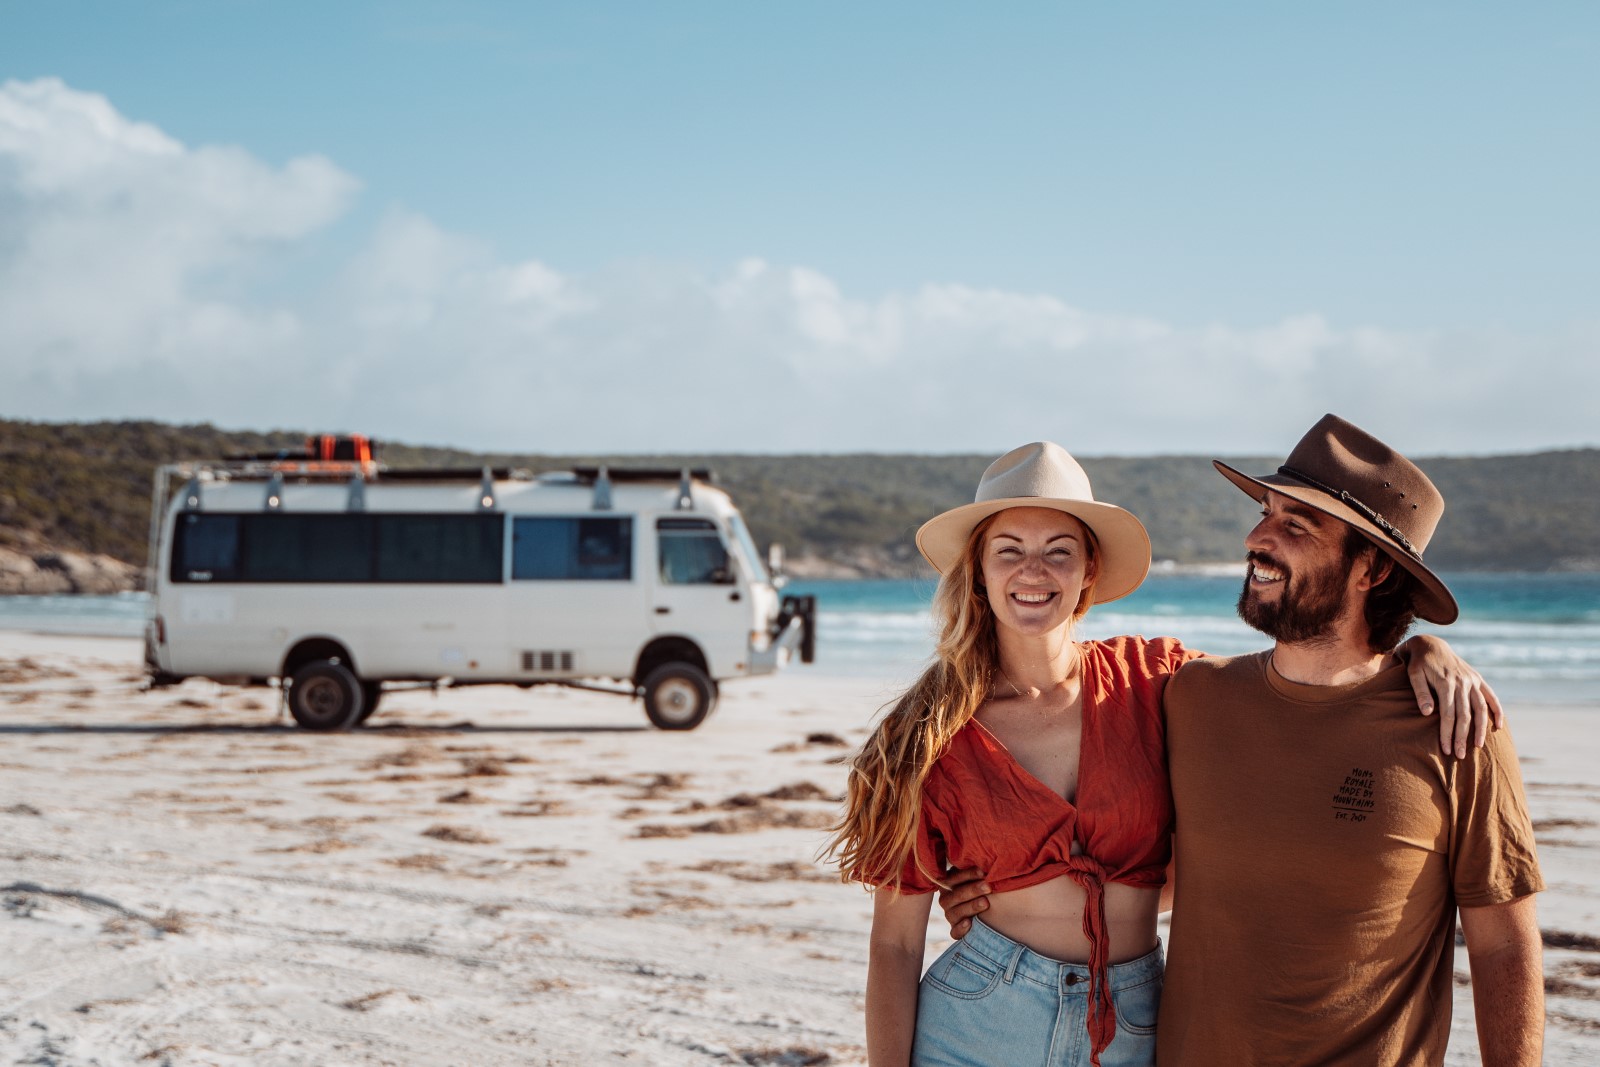 A cheerful couple embraces in front of Salt and Charcoal camper van parked on the sandy shore, with clear blue waters and a sunny sky in the background, evoking a sense of joy and adventure in Bremer Bay beach Western Australia